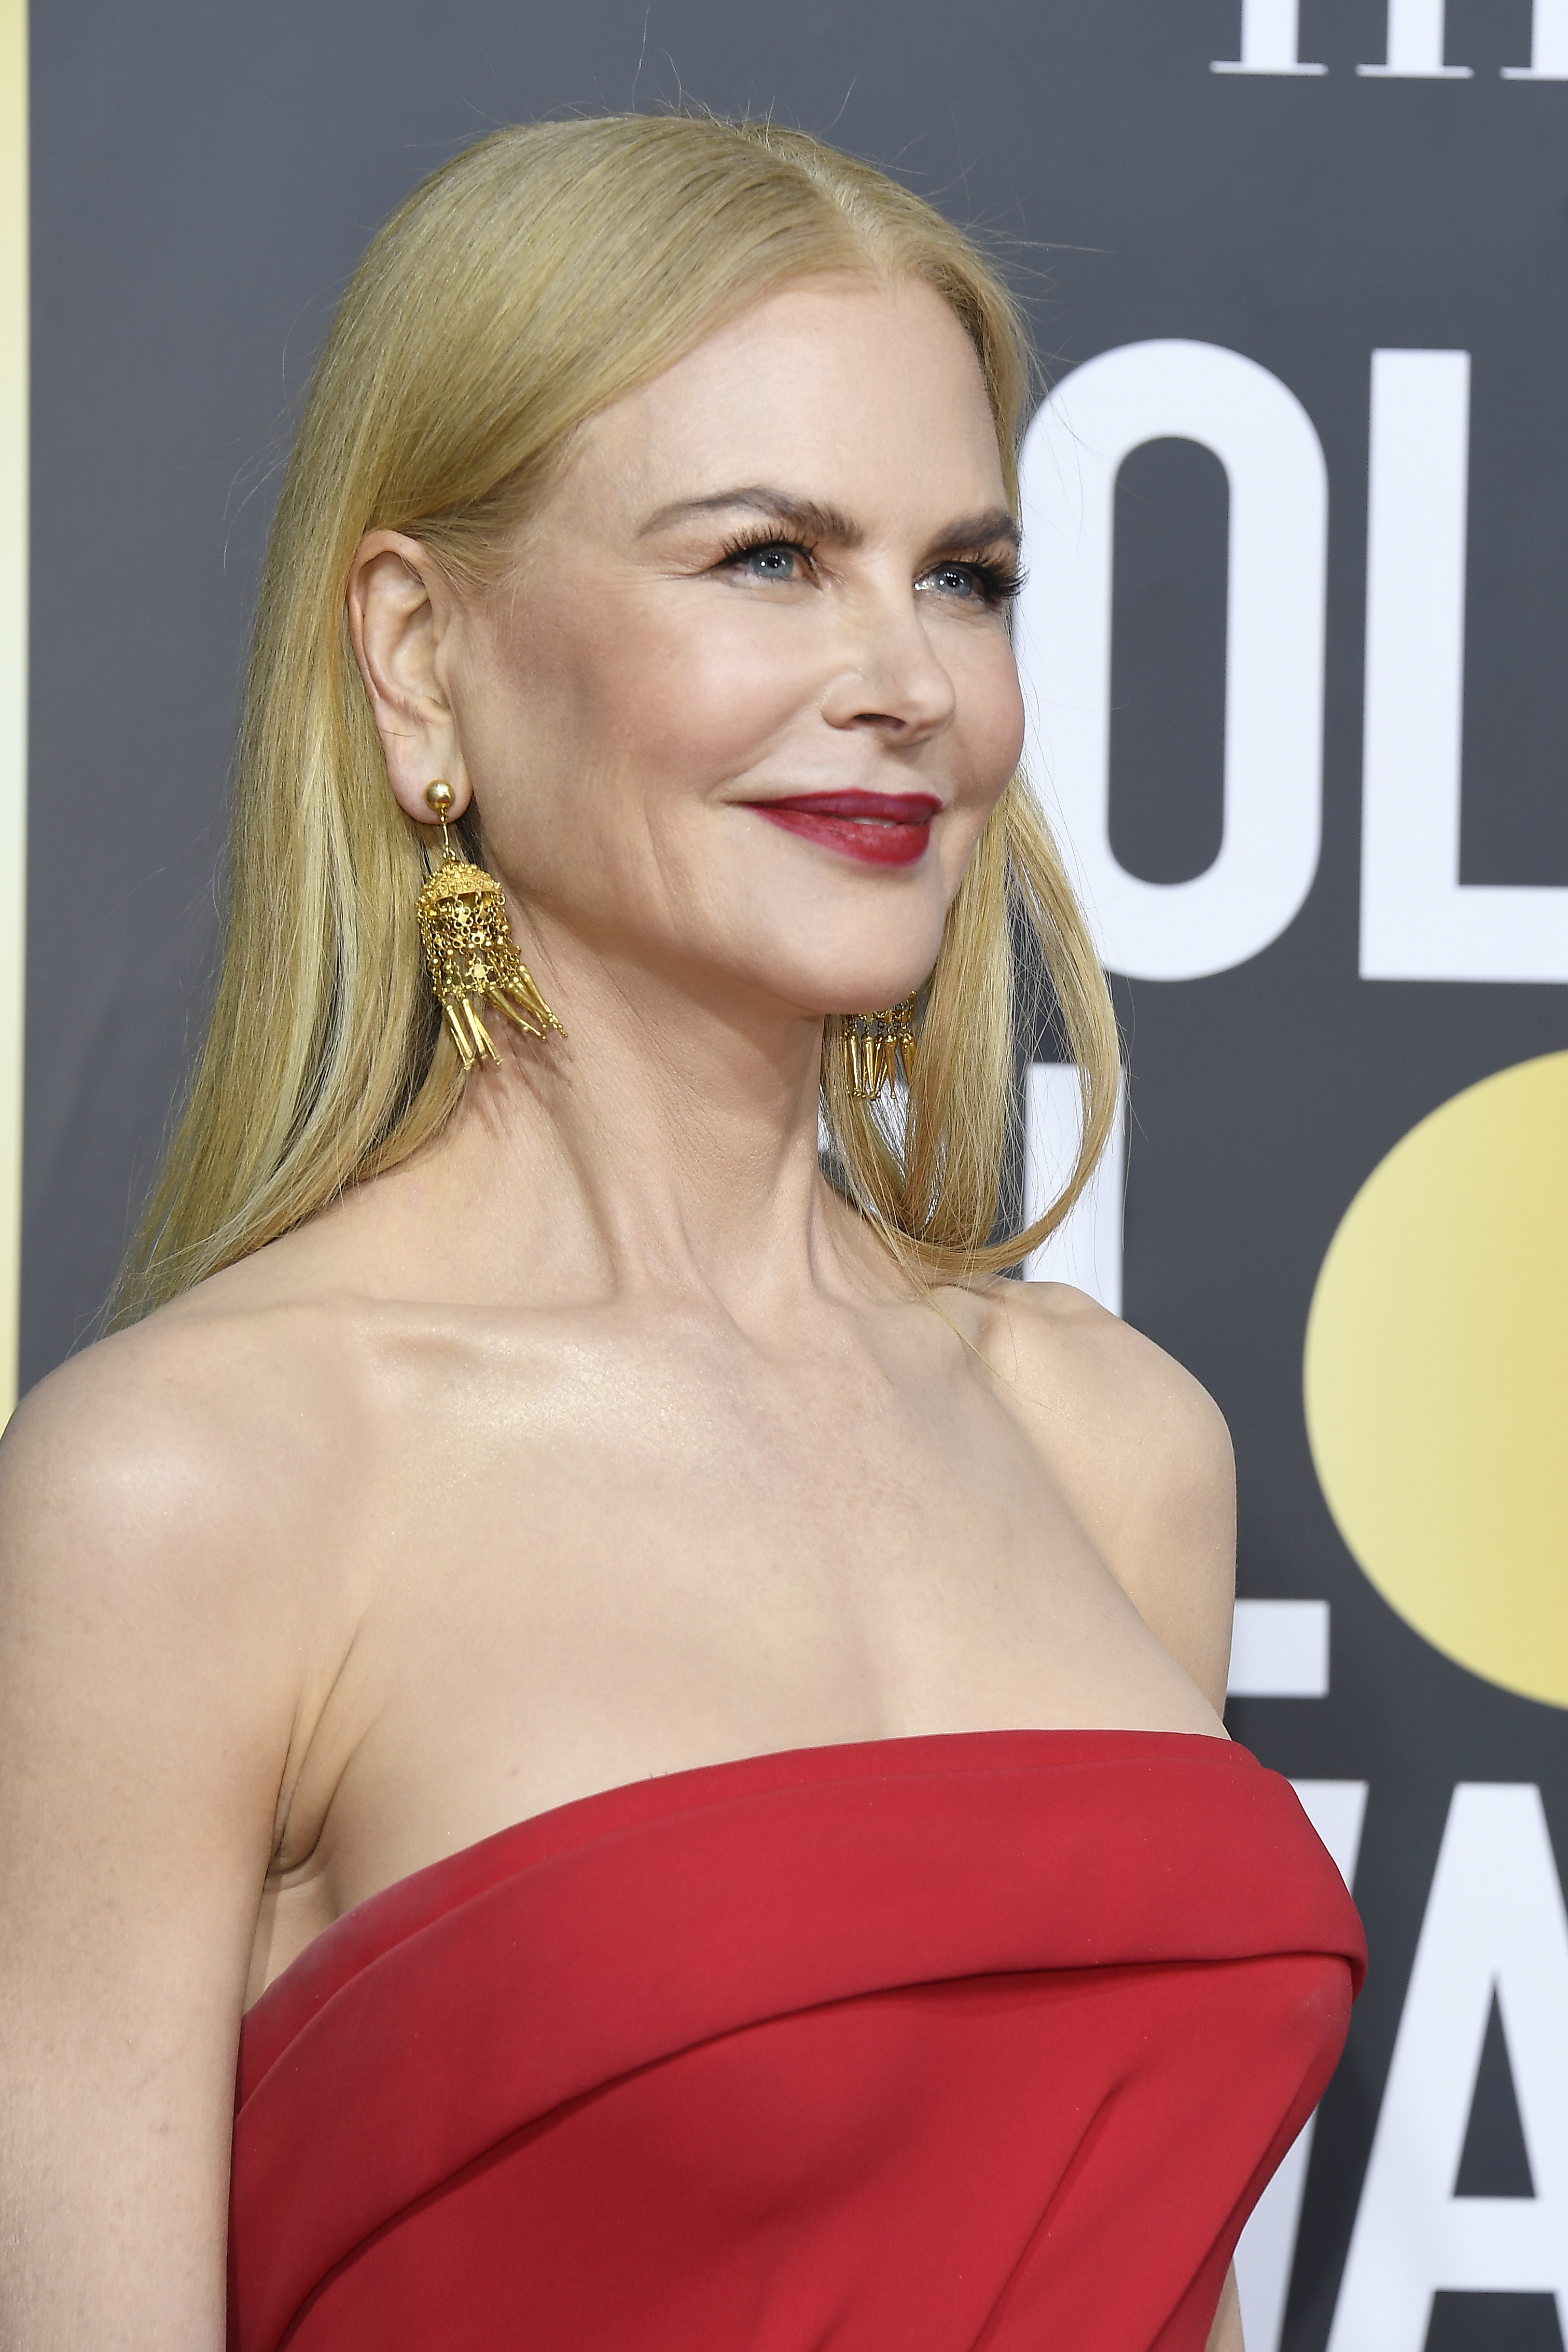 Nicole Kidman arrive to the 77th Annual Golden Globe Awards held at the Beverly Hilton Hotel on January 5, 2020. | Source: Getty Images